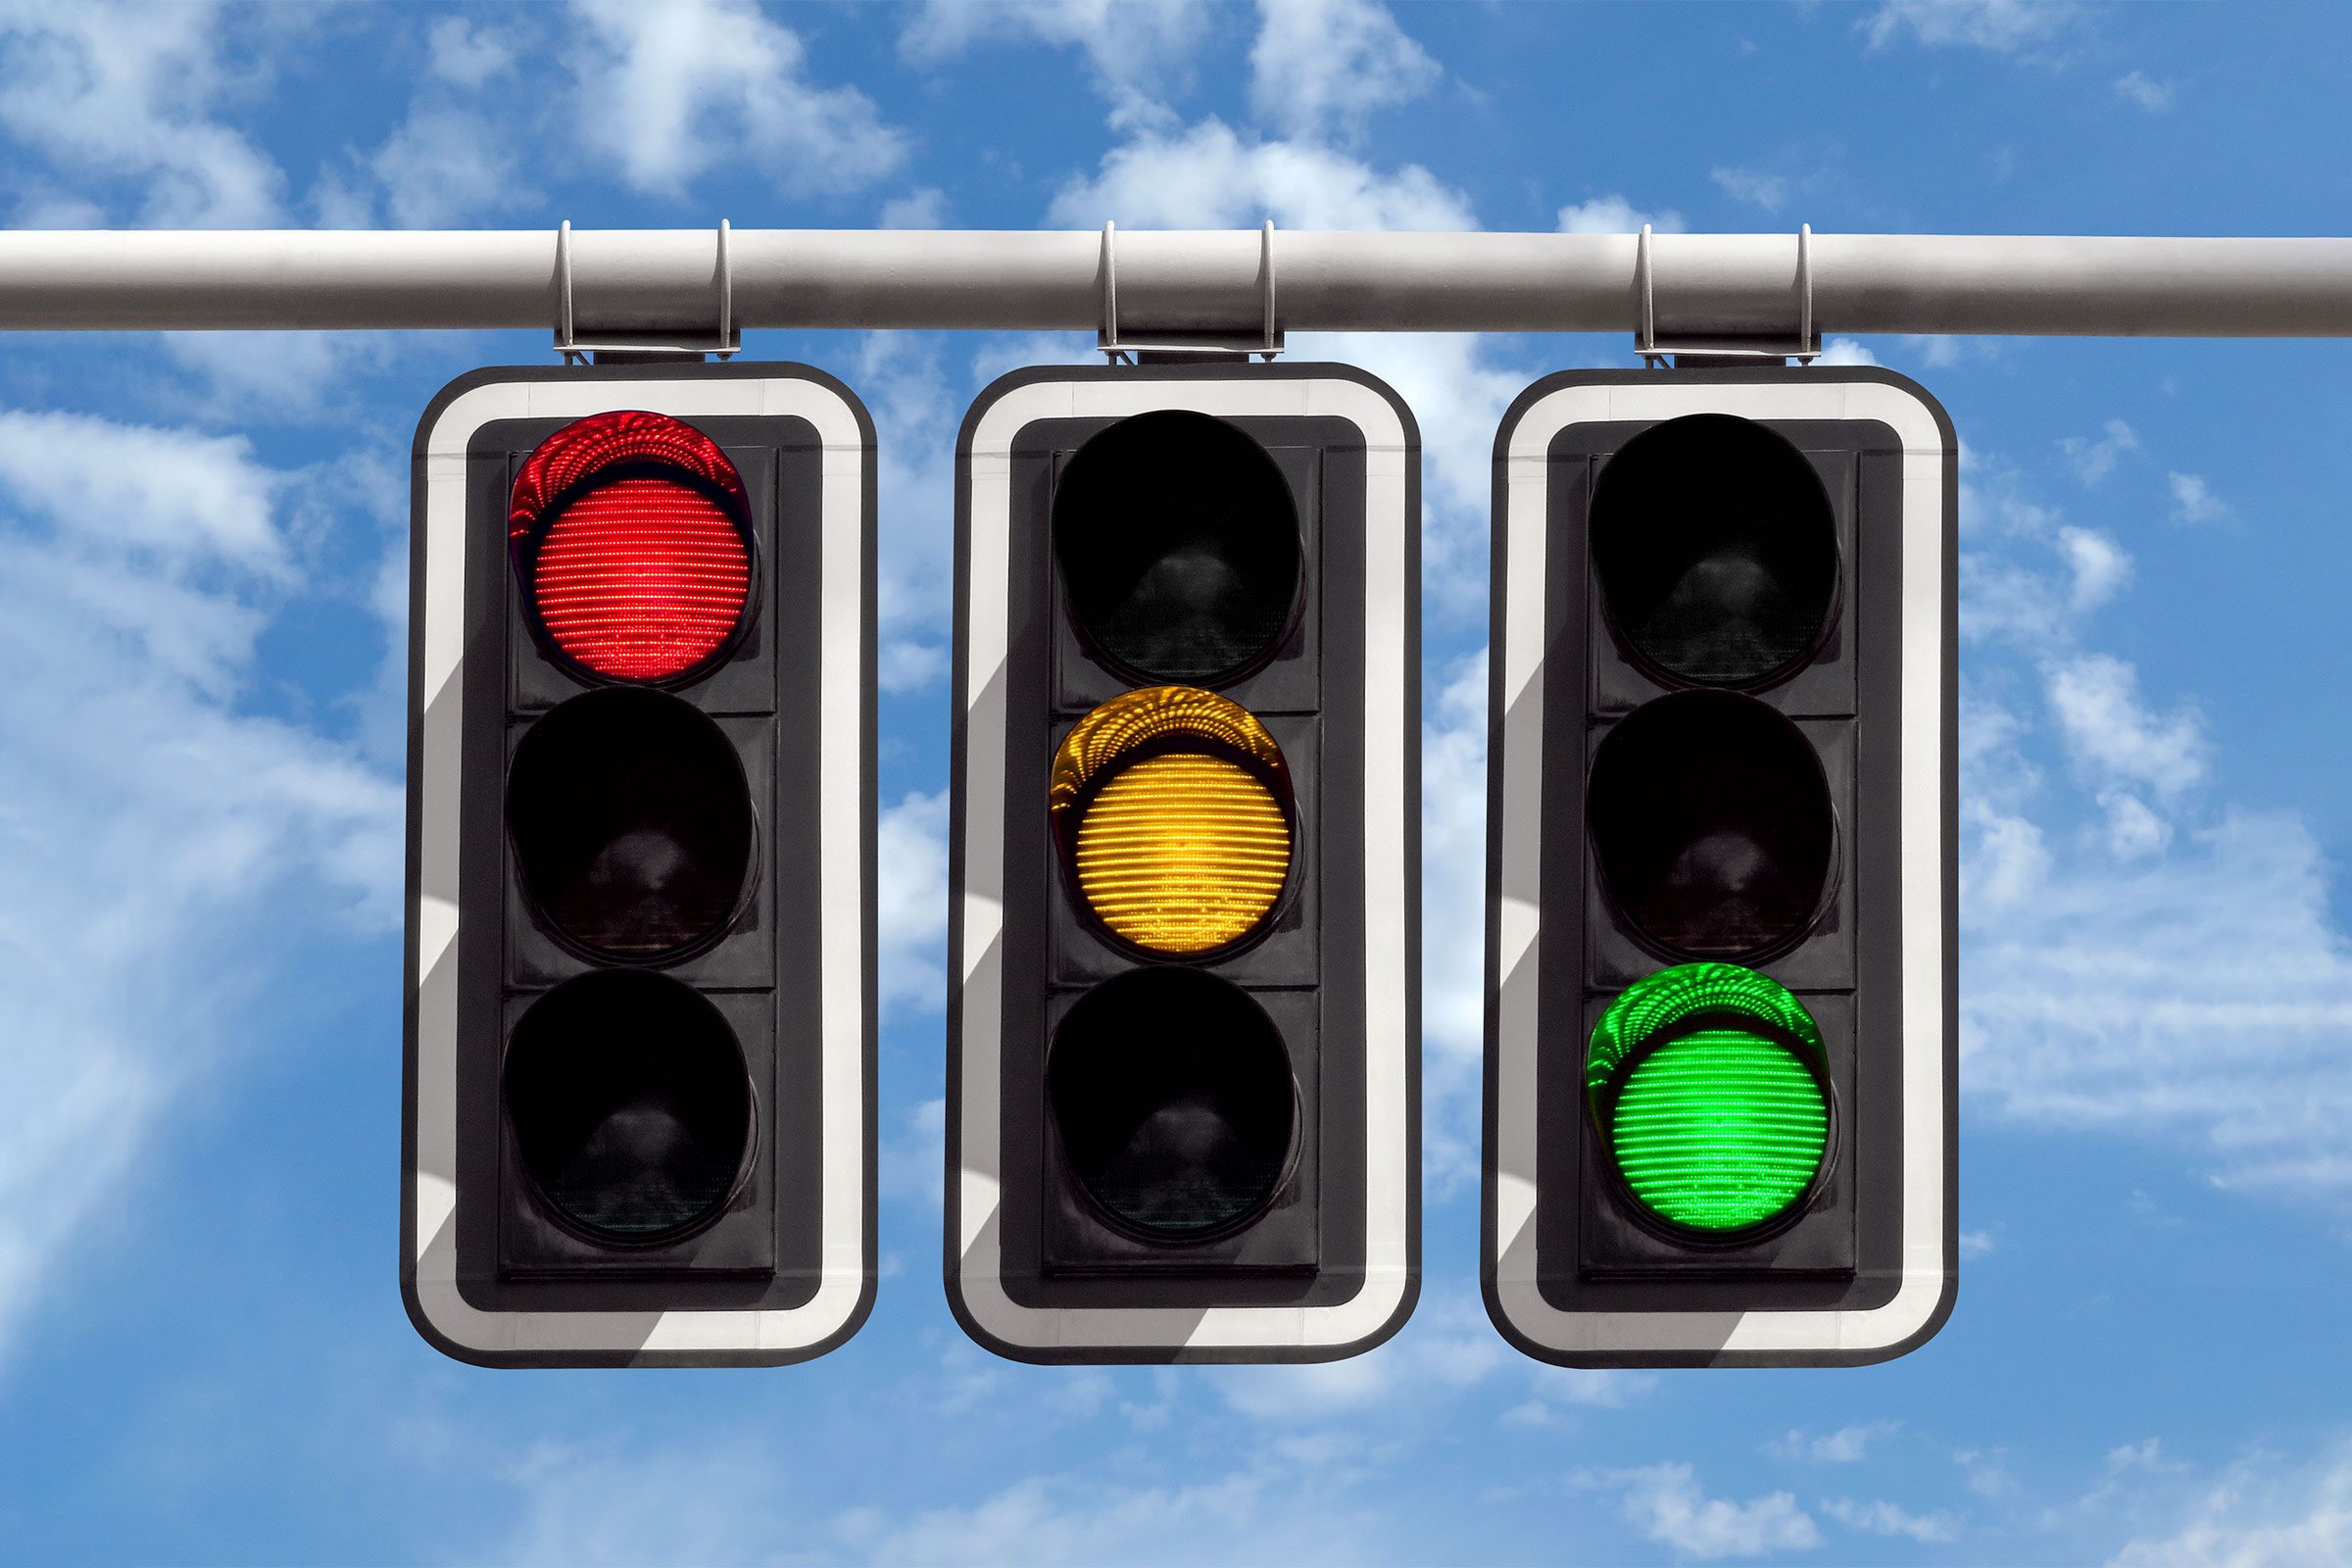 Traffic Light Colors: Why Are Traffic Lights Red, Yellow and Green?